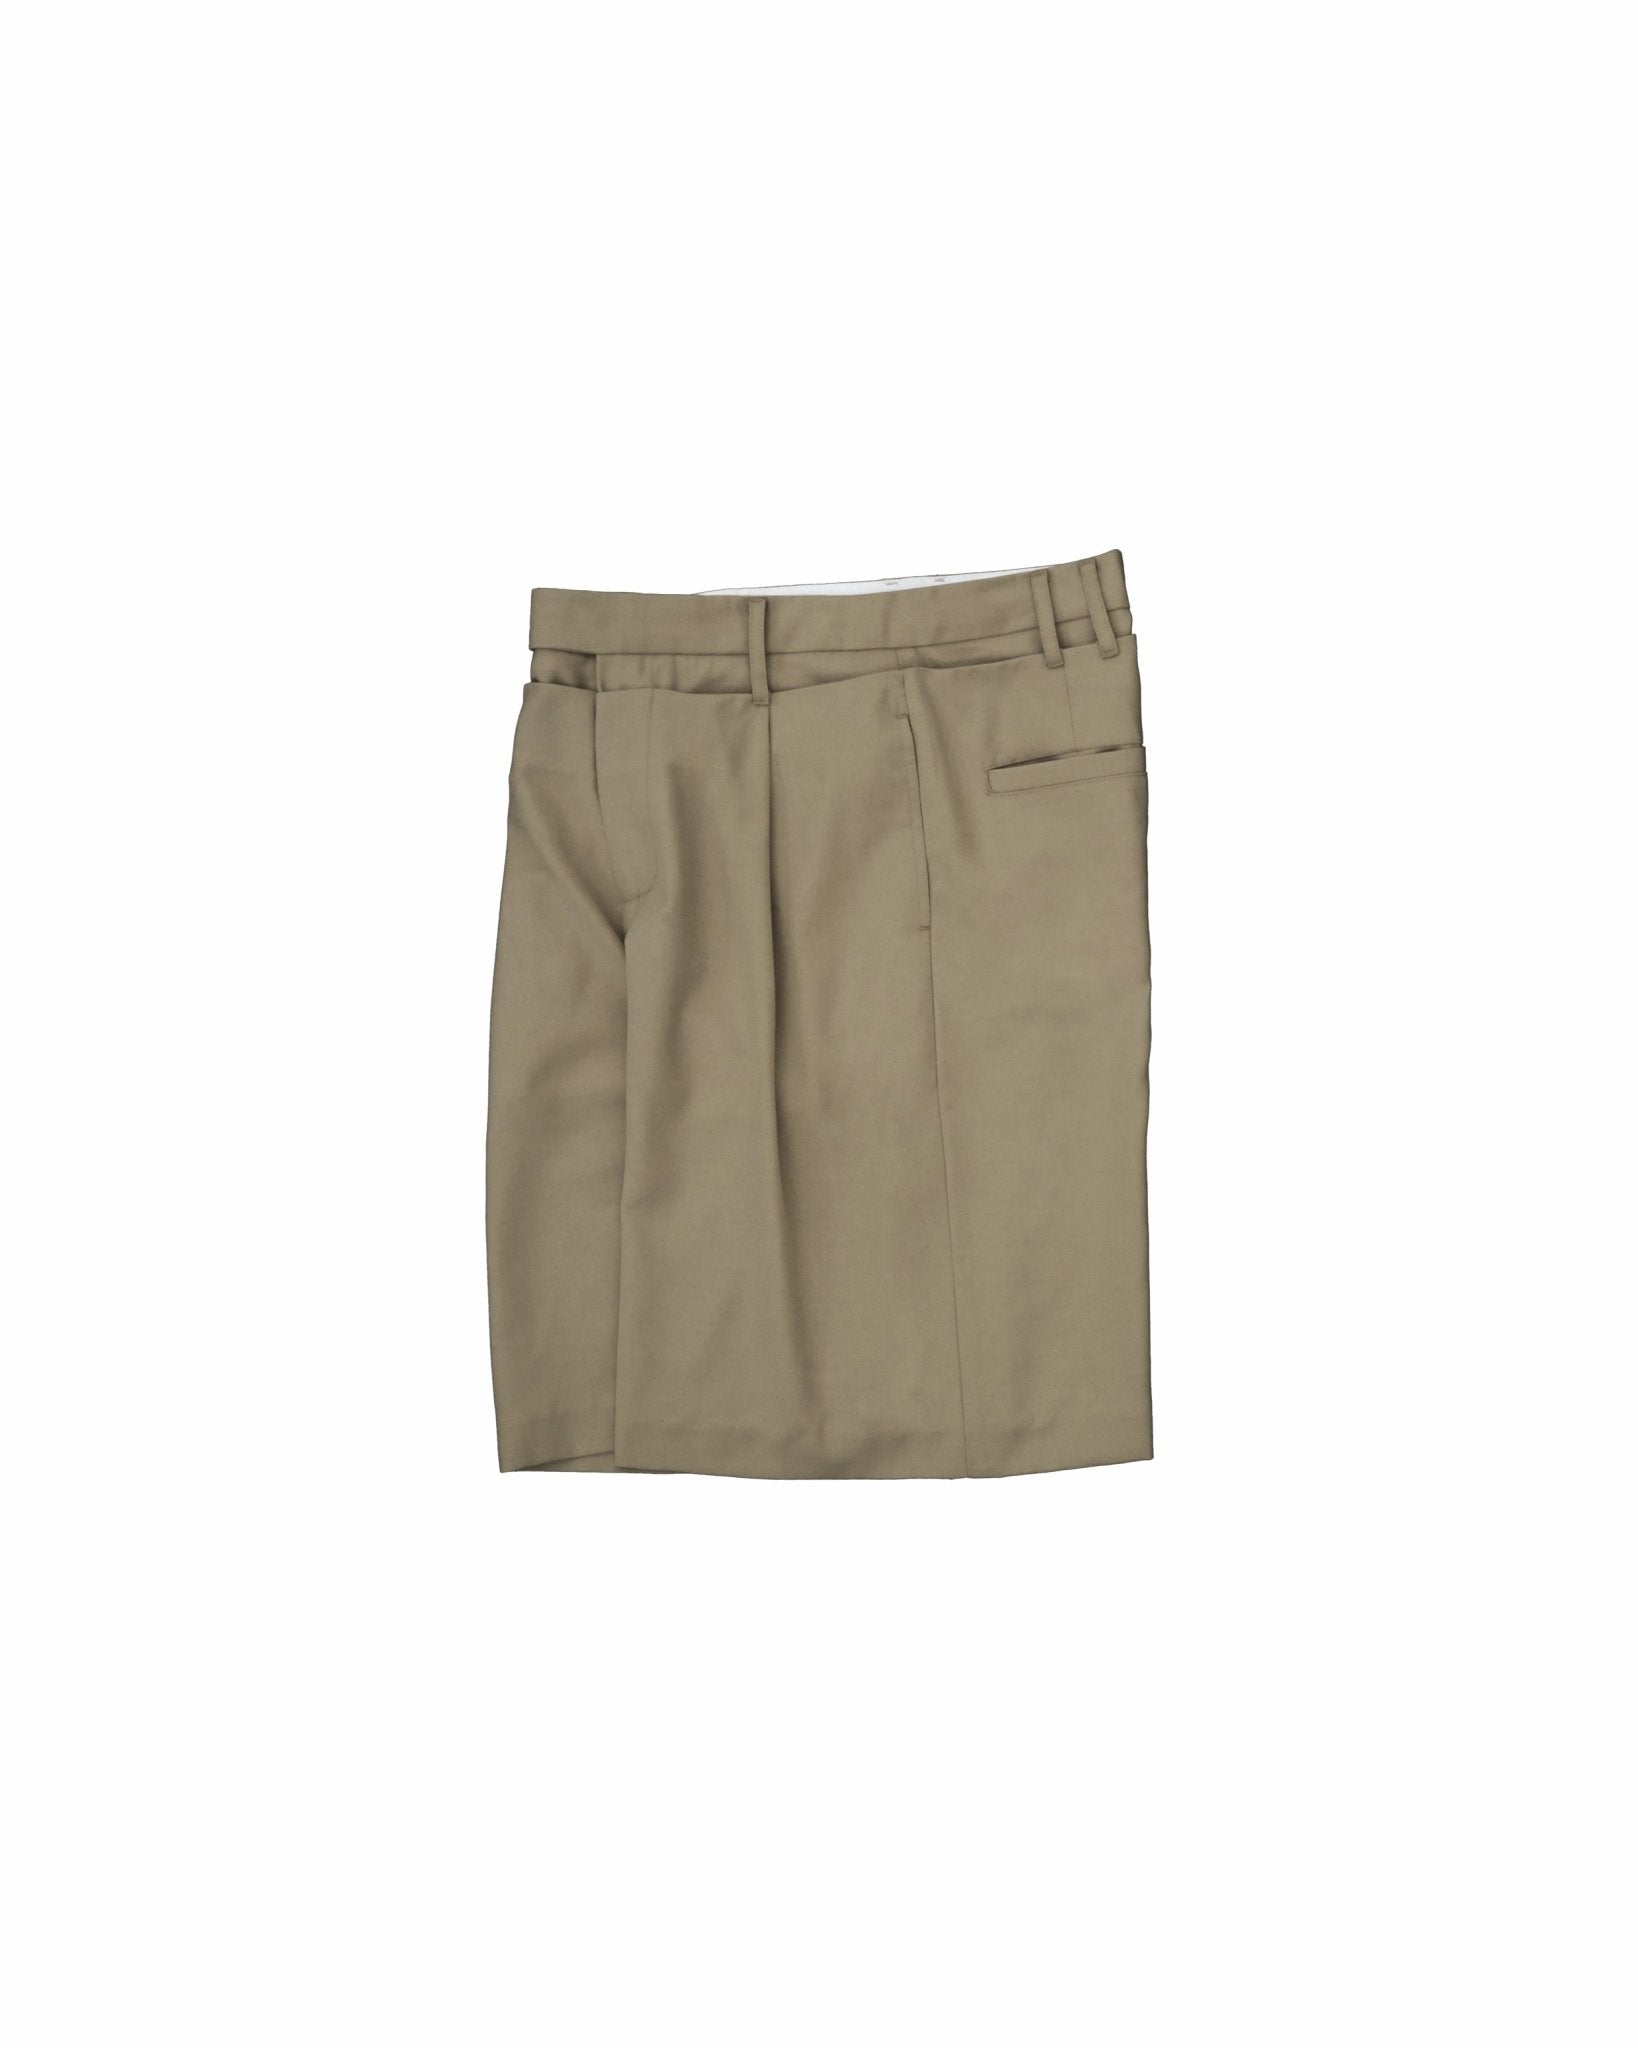 Double Waist Shorts - Olive - G R A Y E